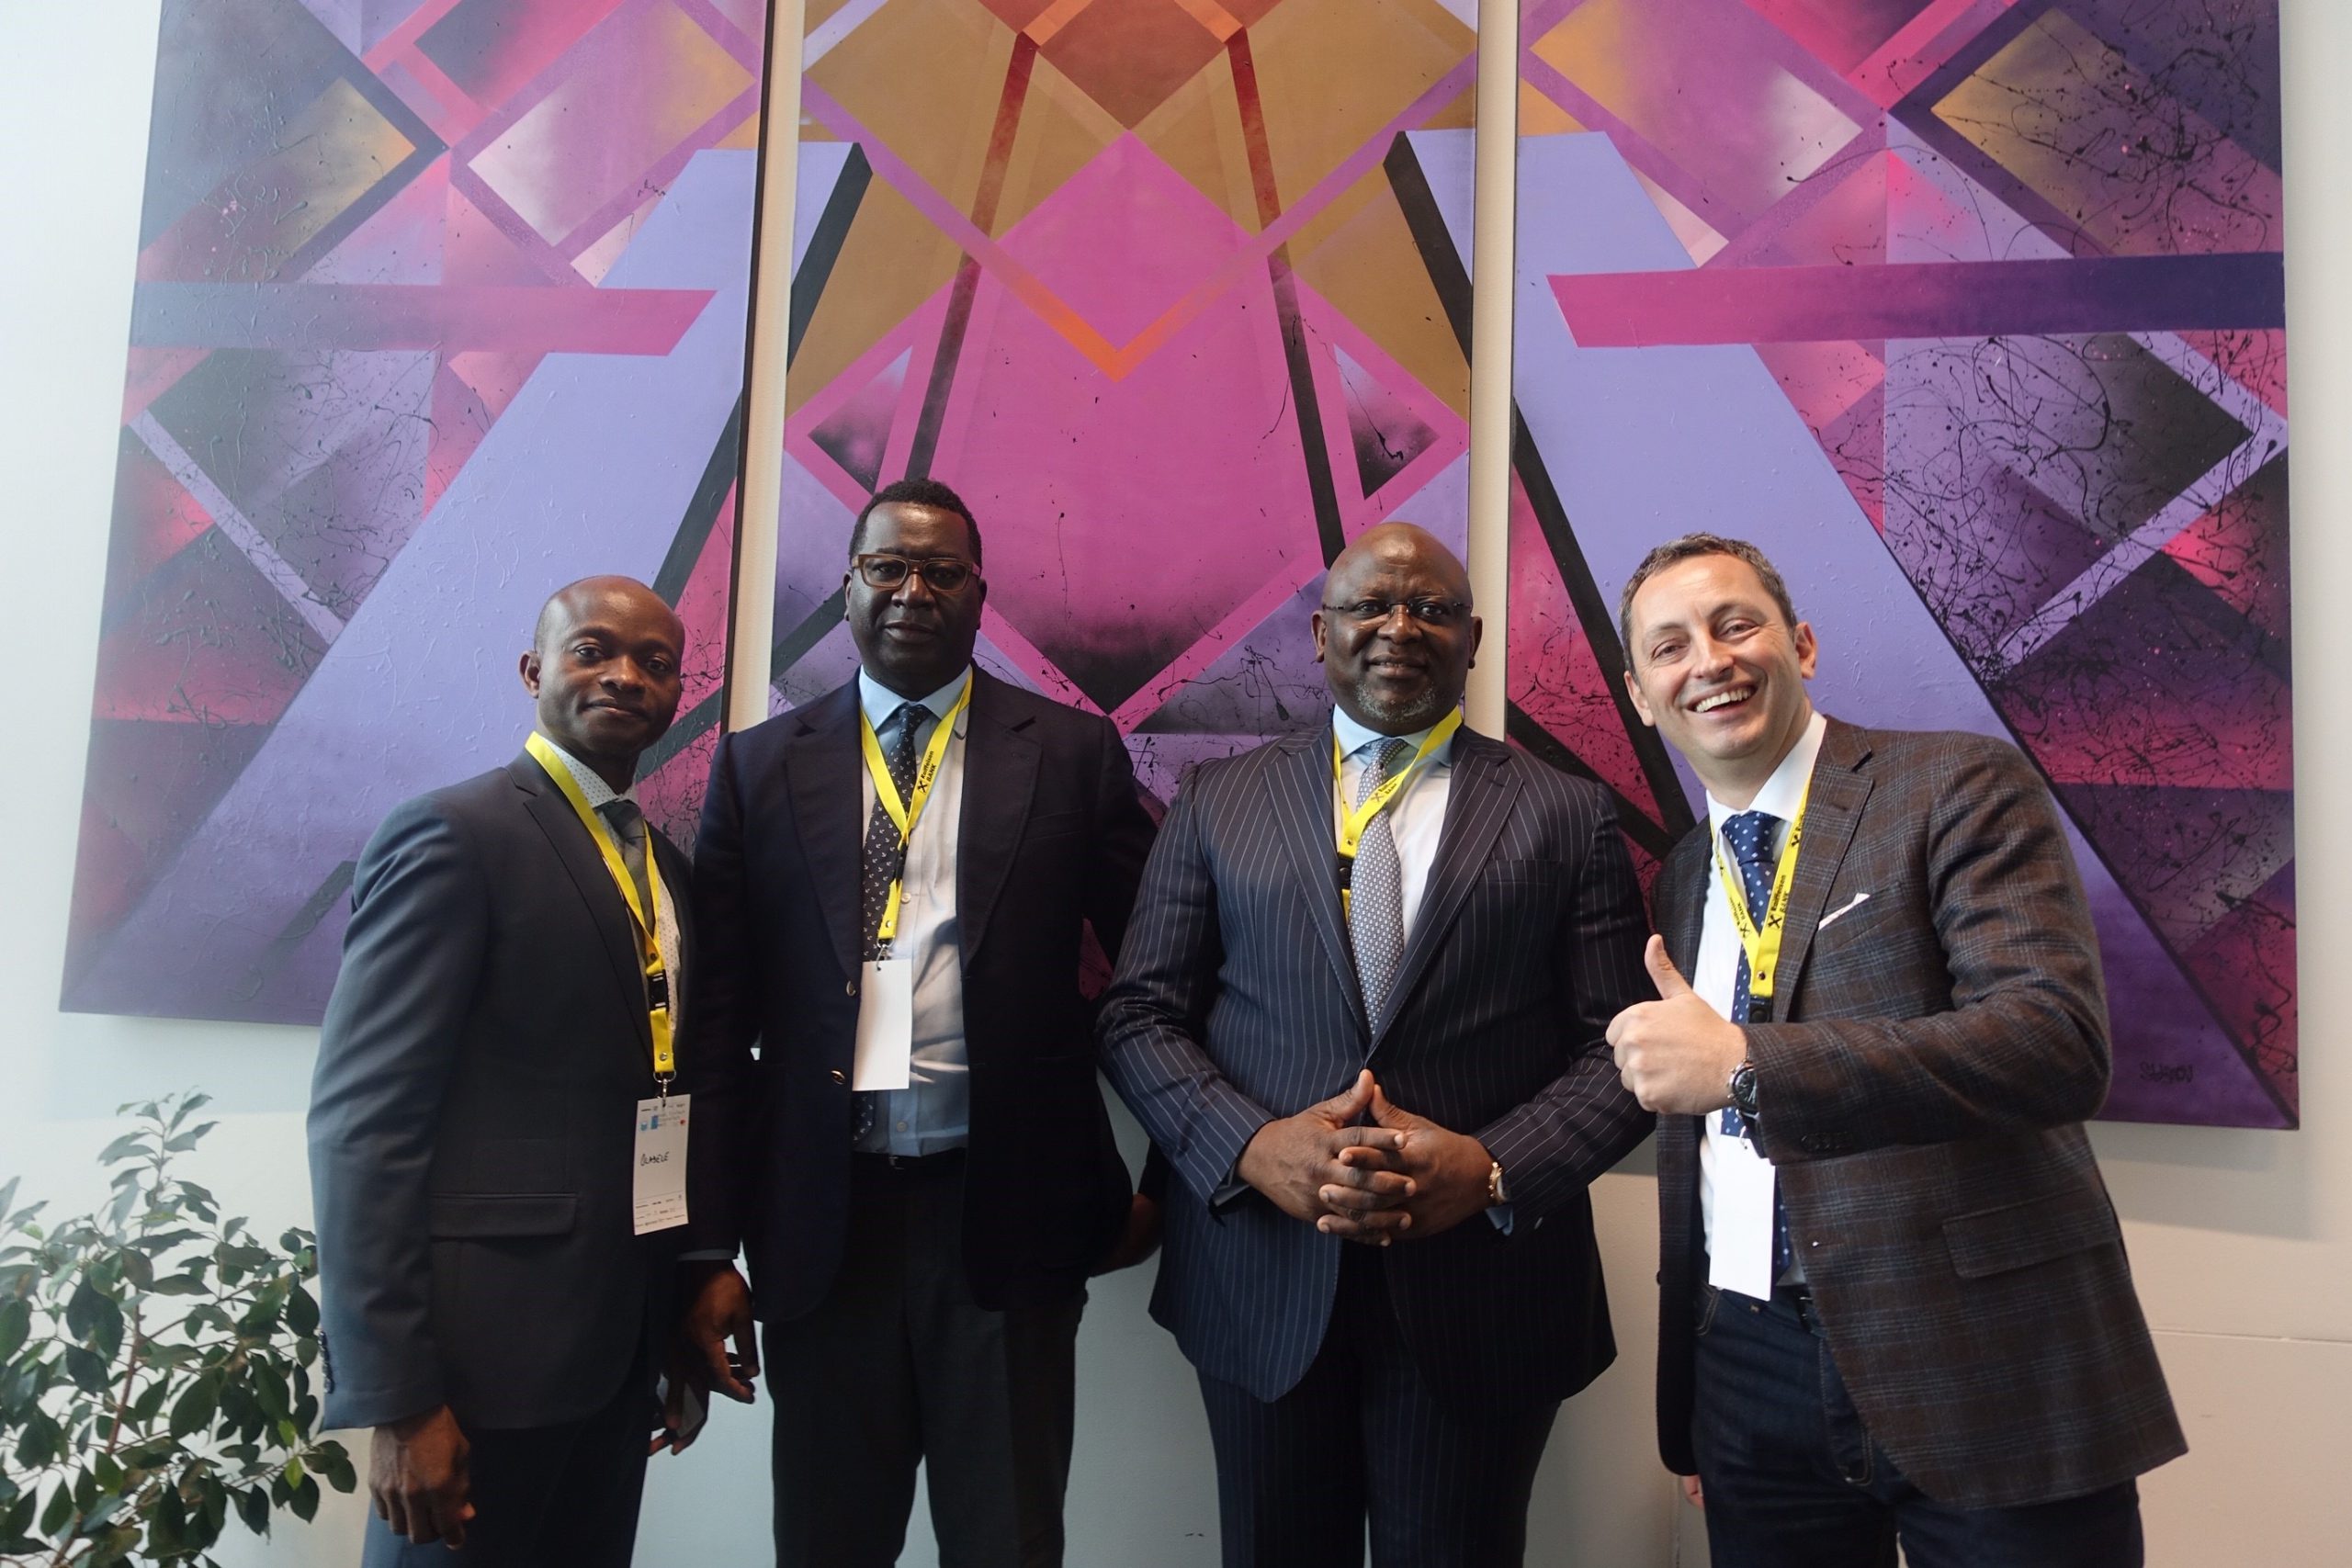 • L-R: Mr. Tunde Oladele, CEO, Software Group; Mr. Olayinka Situ, Group Head, Corporate Transformation, FirstBank; Dr. Adesola Adeduntan, CEO, FirstBank and Filip Genov, Co-Founder & CEO, F27 at the Annual FinTech & InsureTech Summit held at Sofia Event Center, Bulgaria.